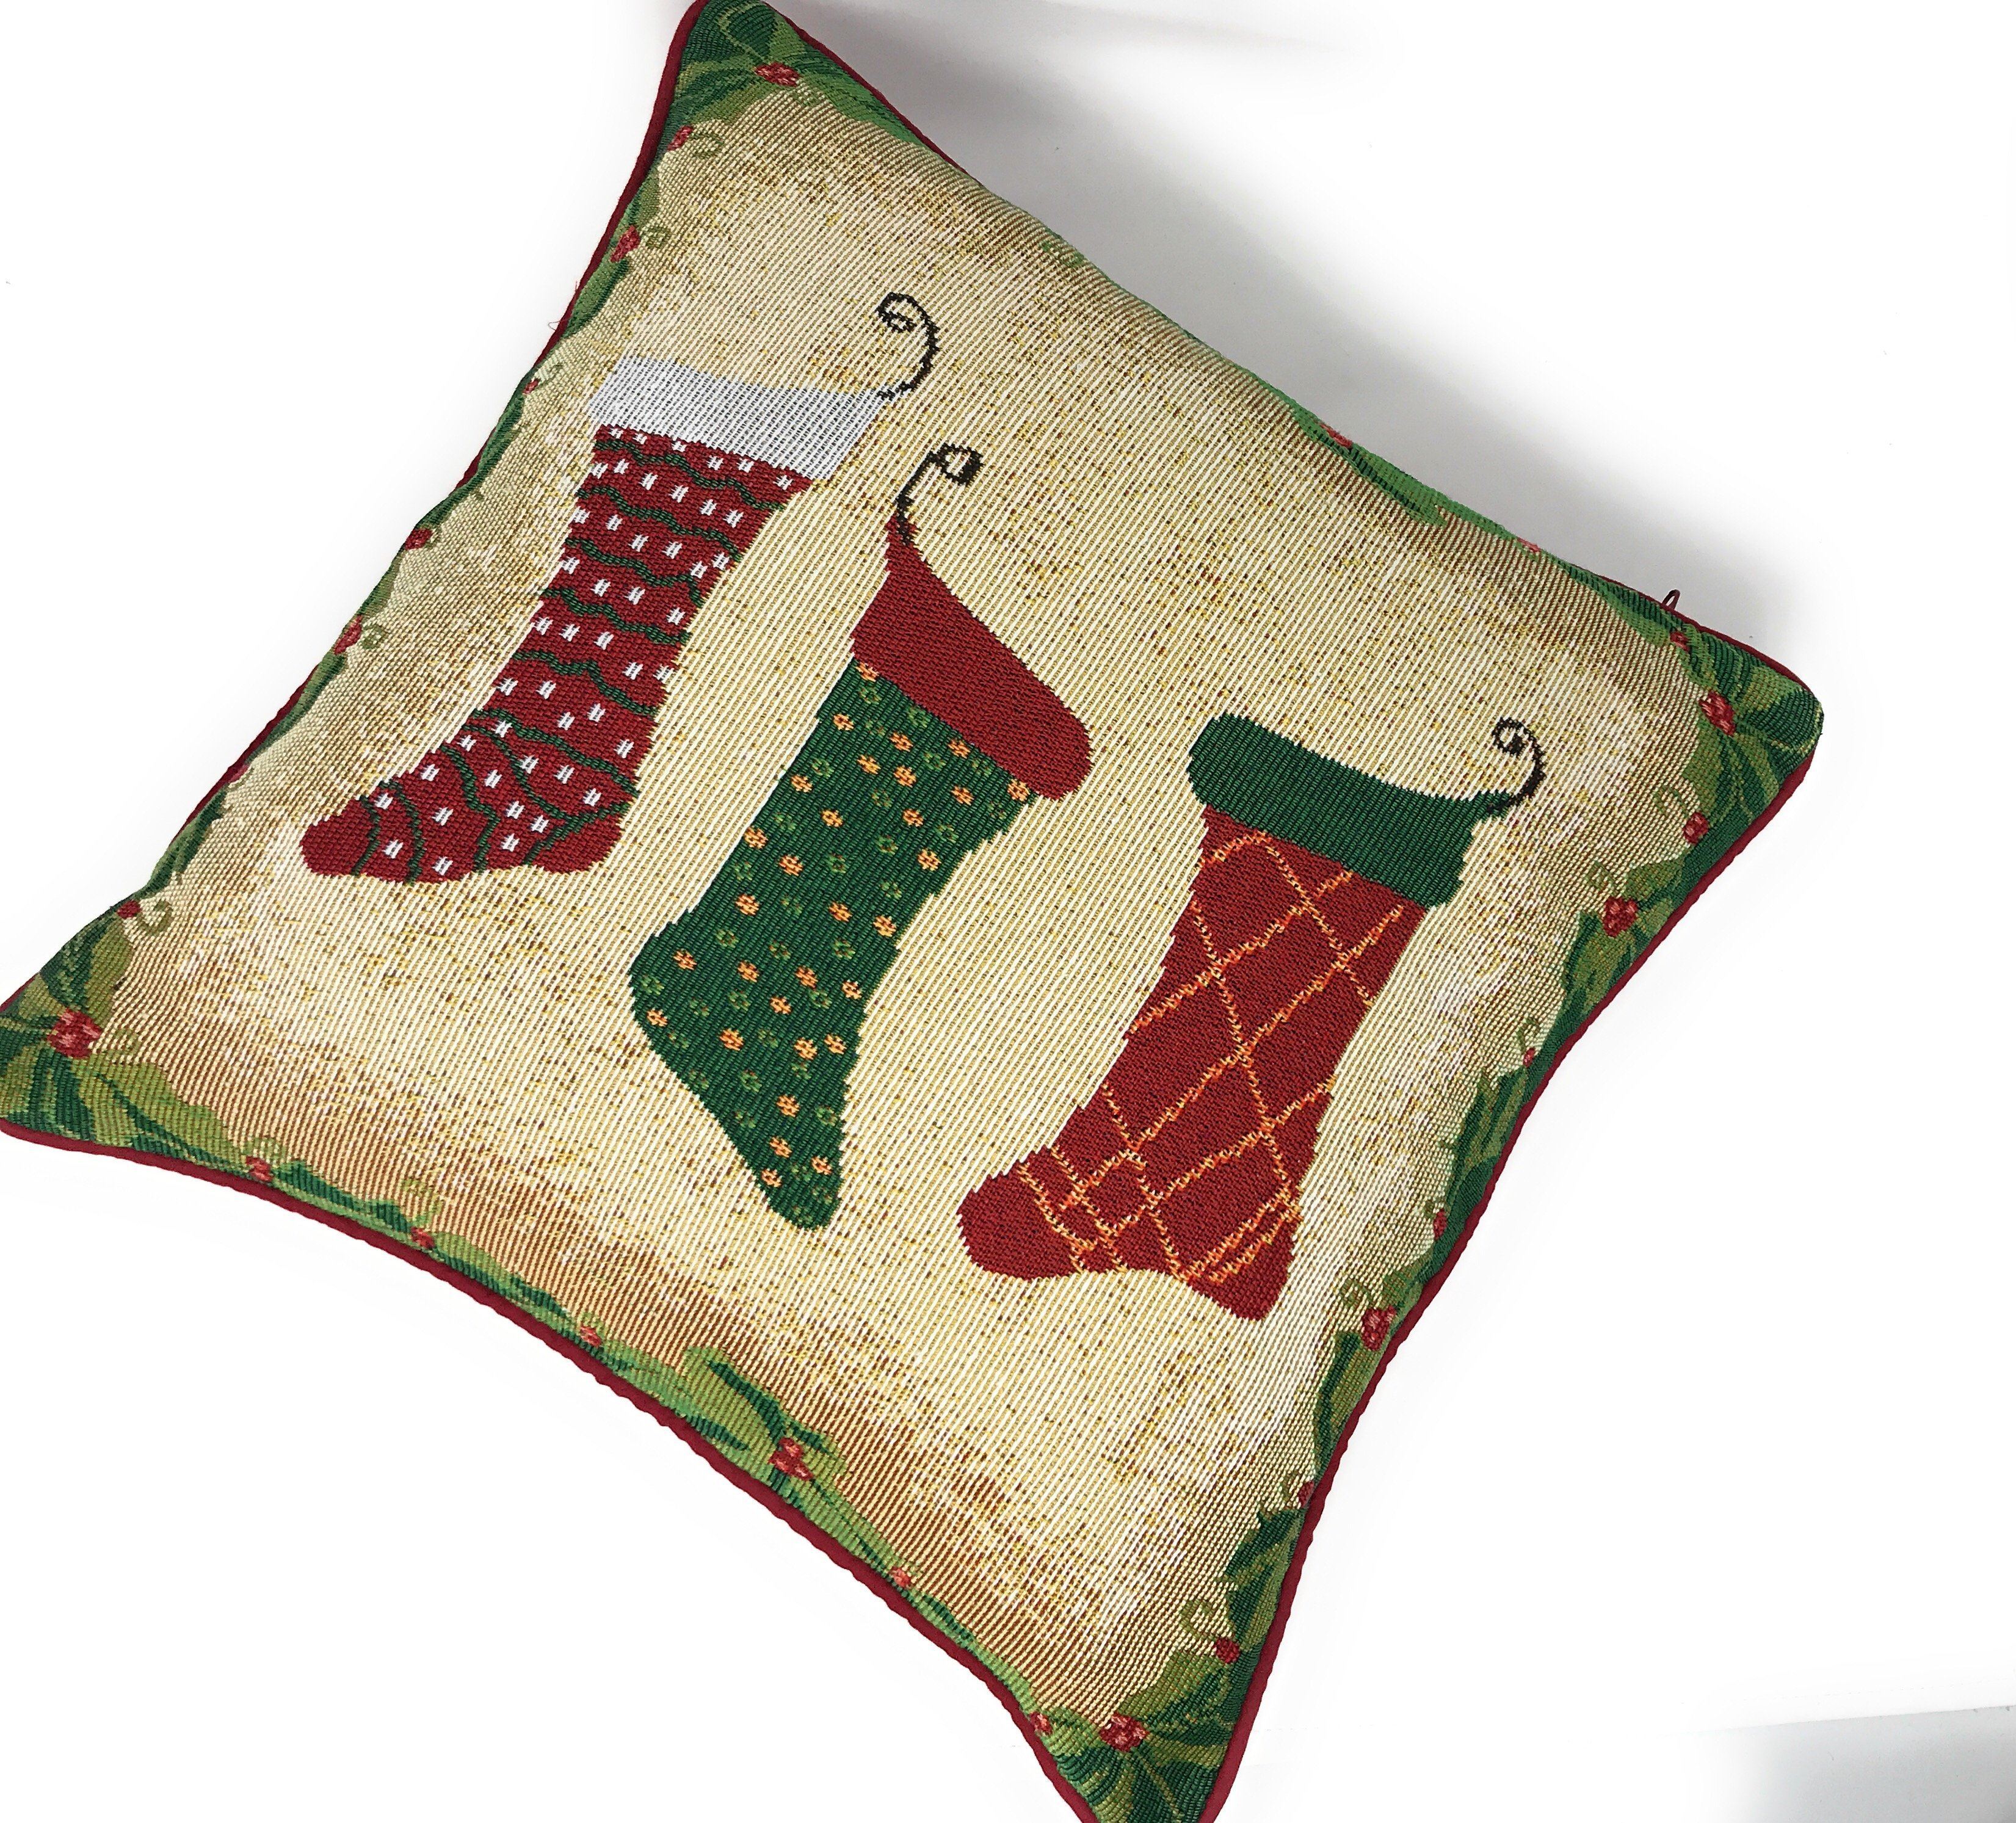 Tache Festive Christmas Holiday Hang My Stockings By the Fireplace Throw Pillow Cover (12910CC) - Tache Home Fashion